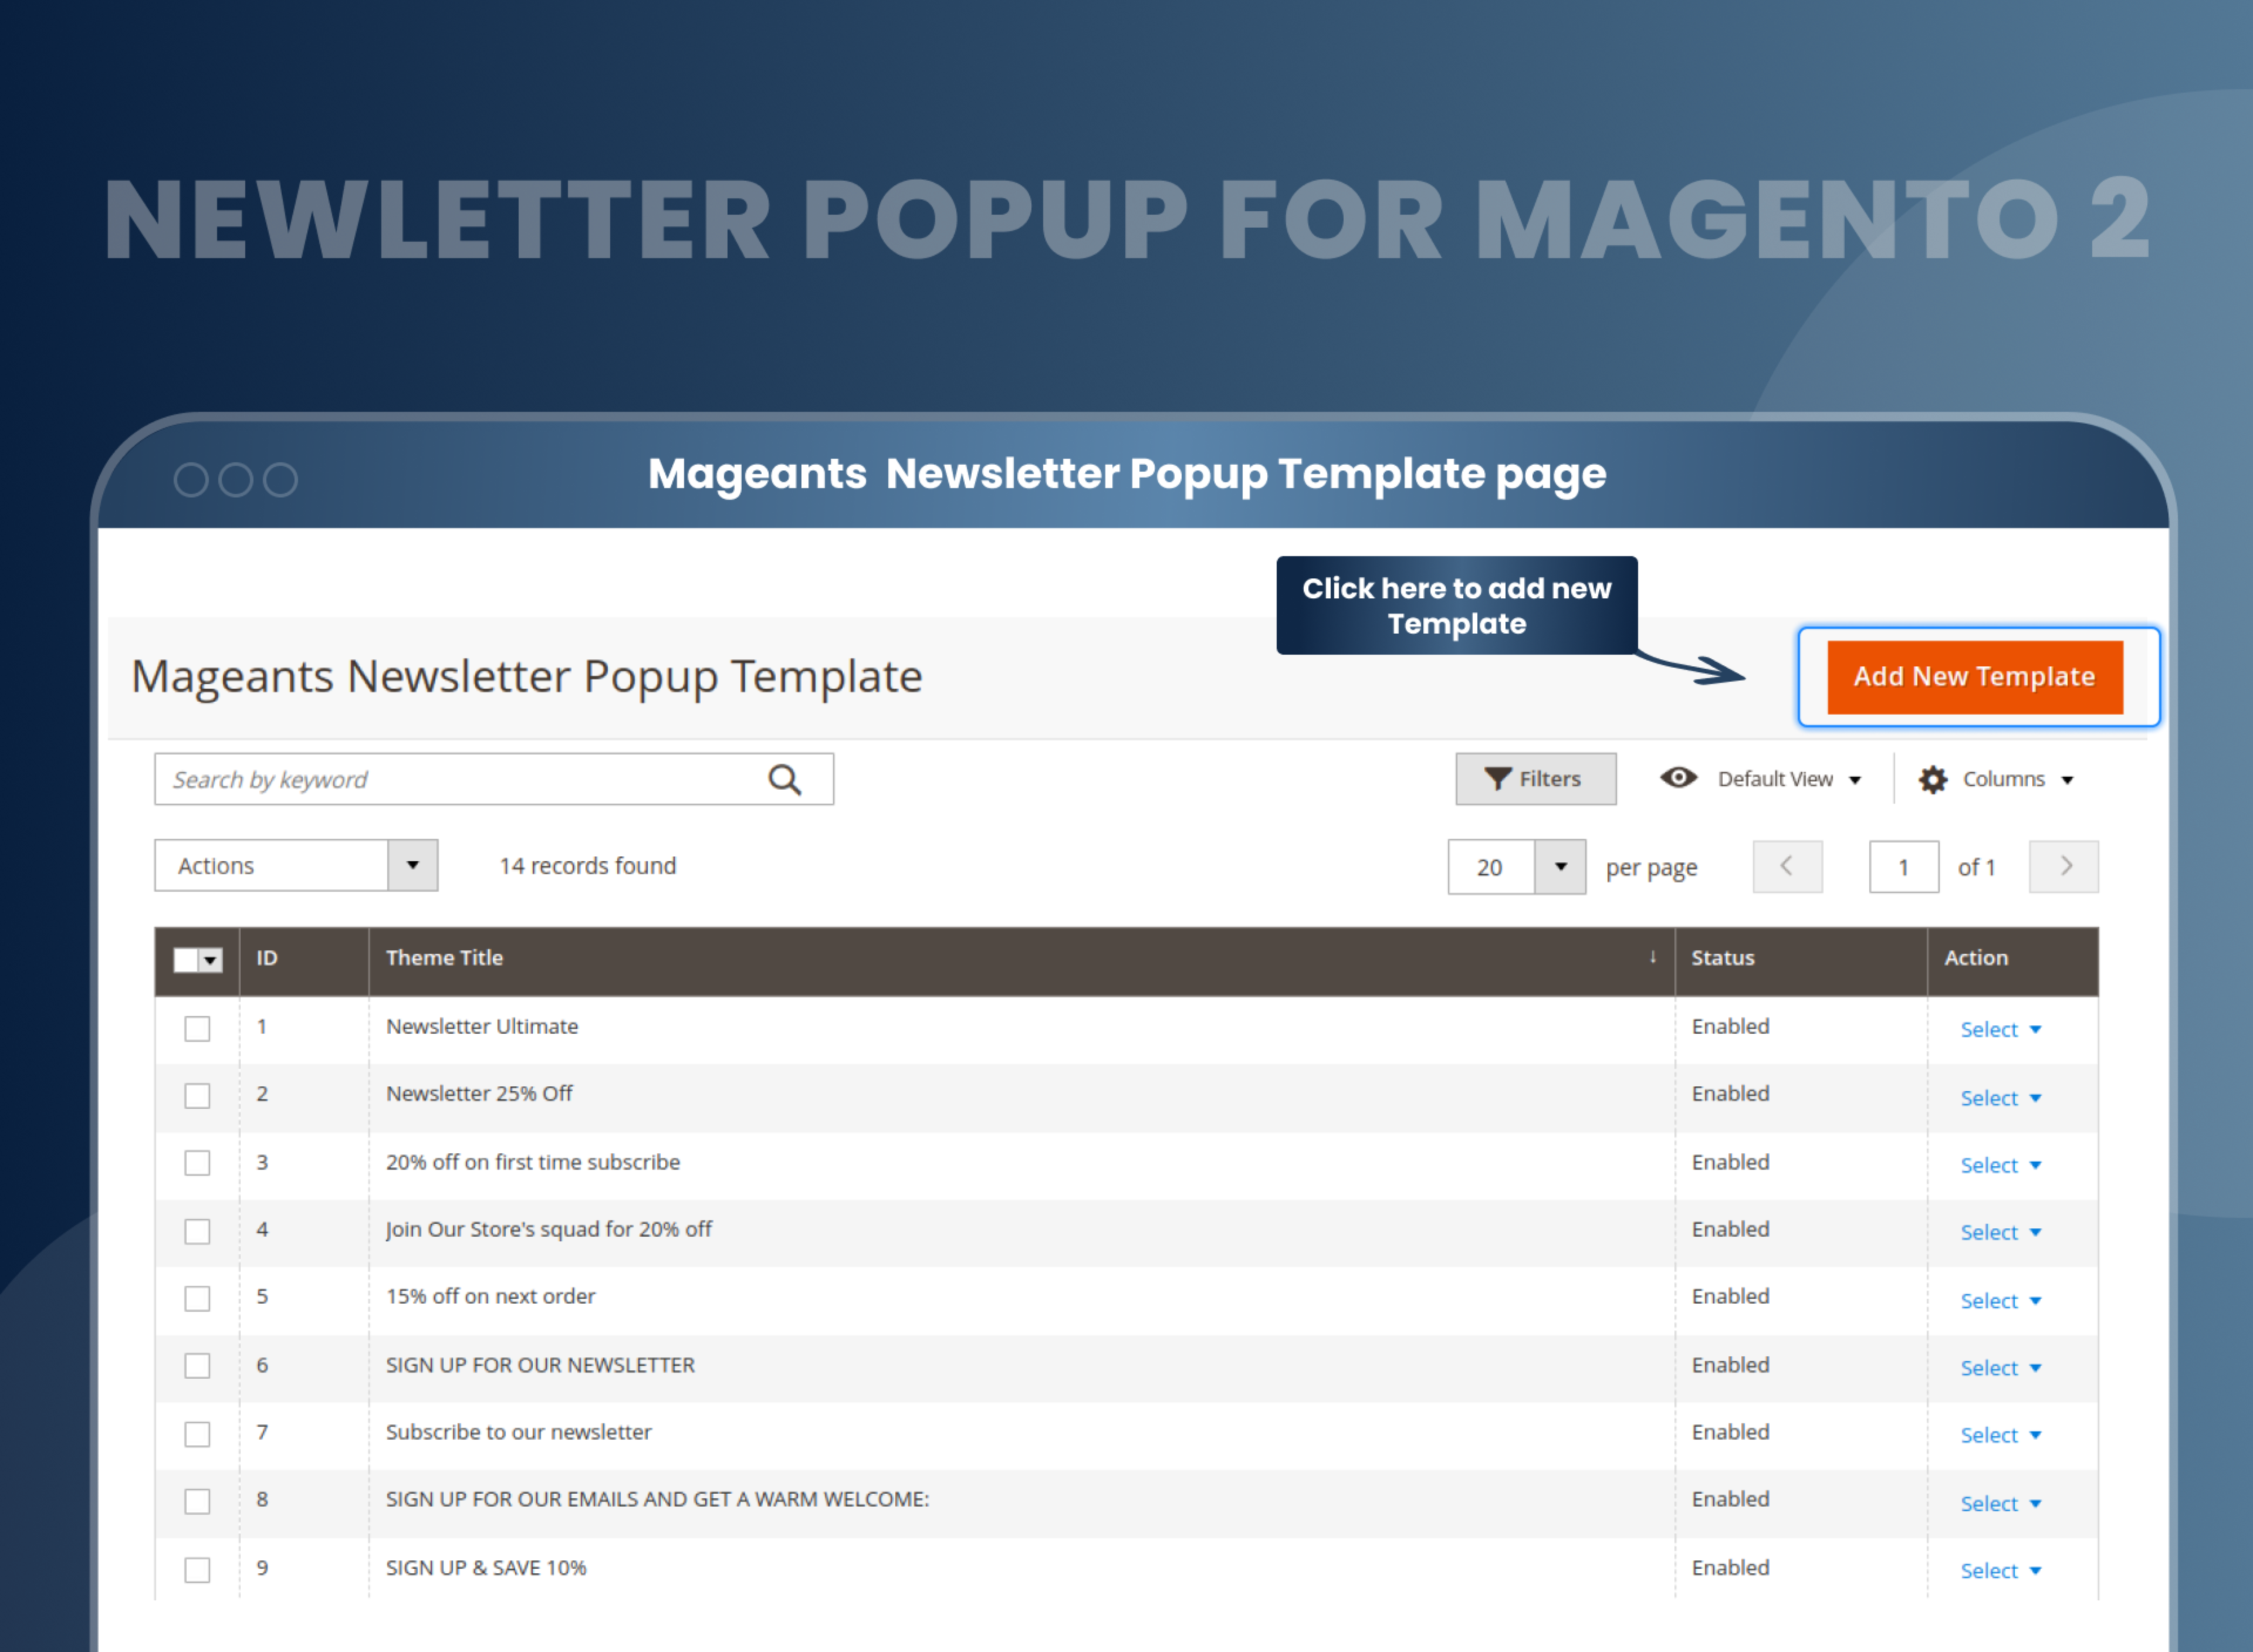 Mageants Newsletter Popup Template page